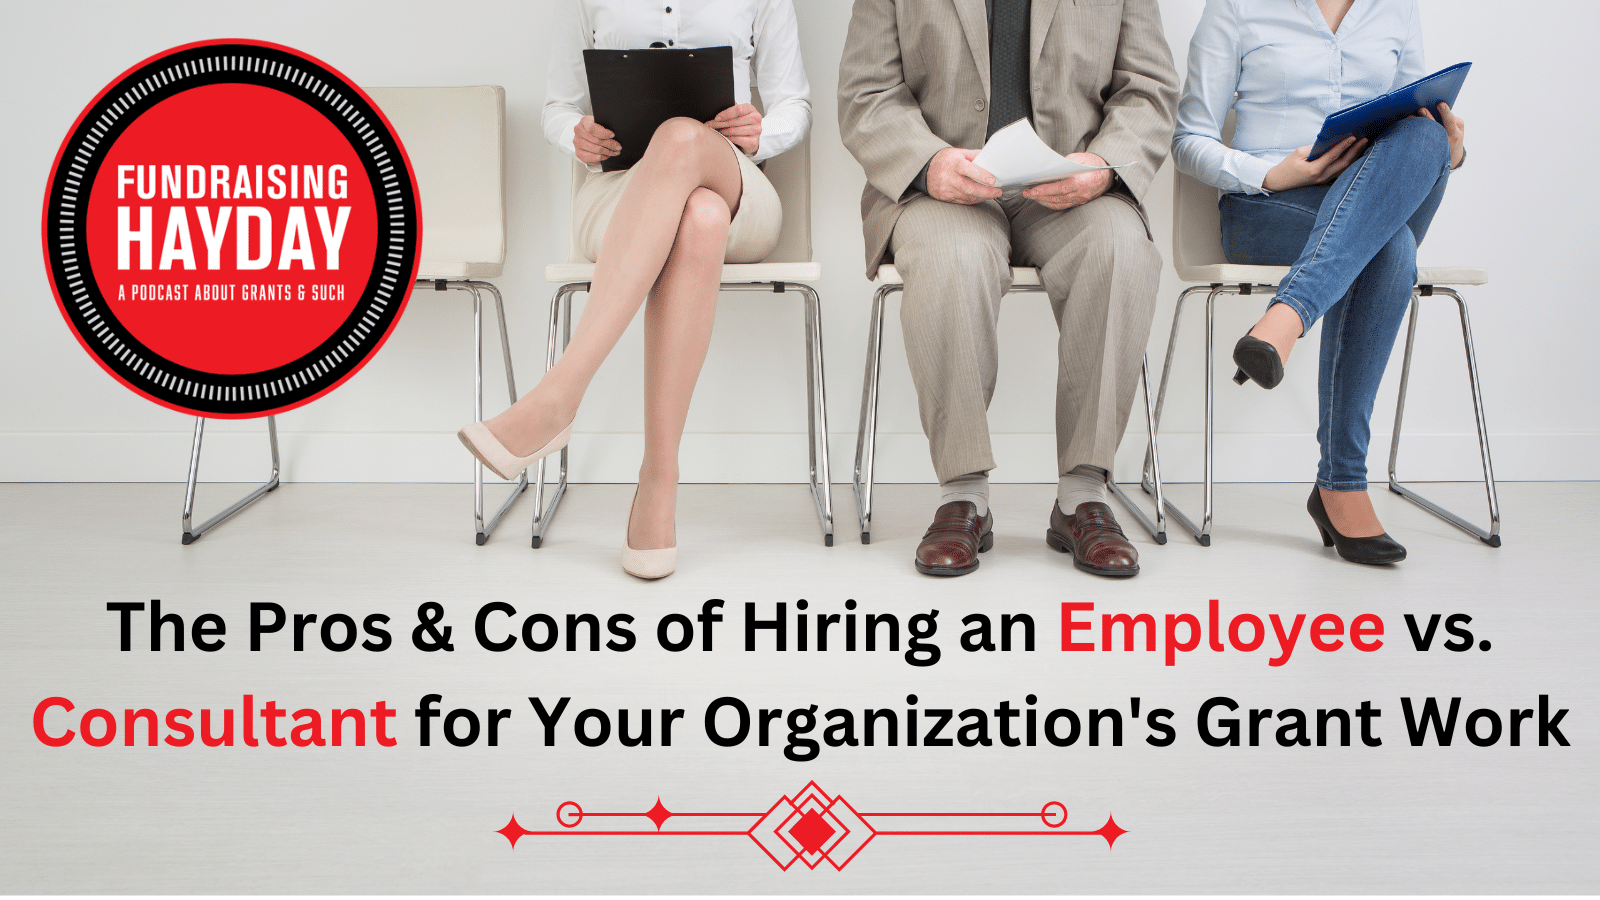 Grant Work: Hiring an Employee vs. a Consultant